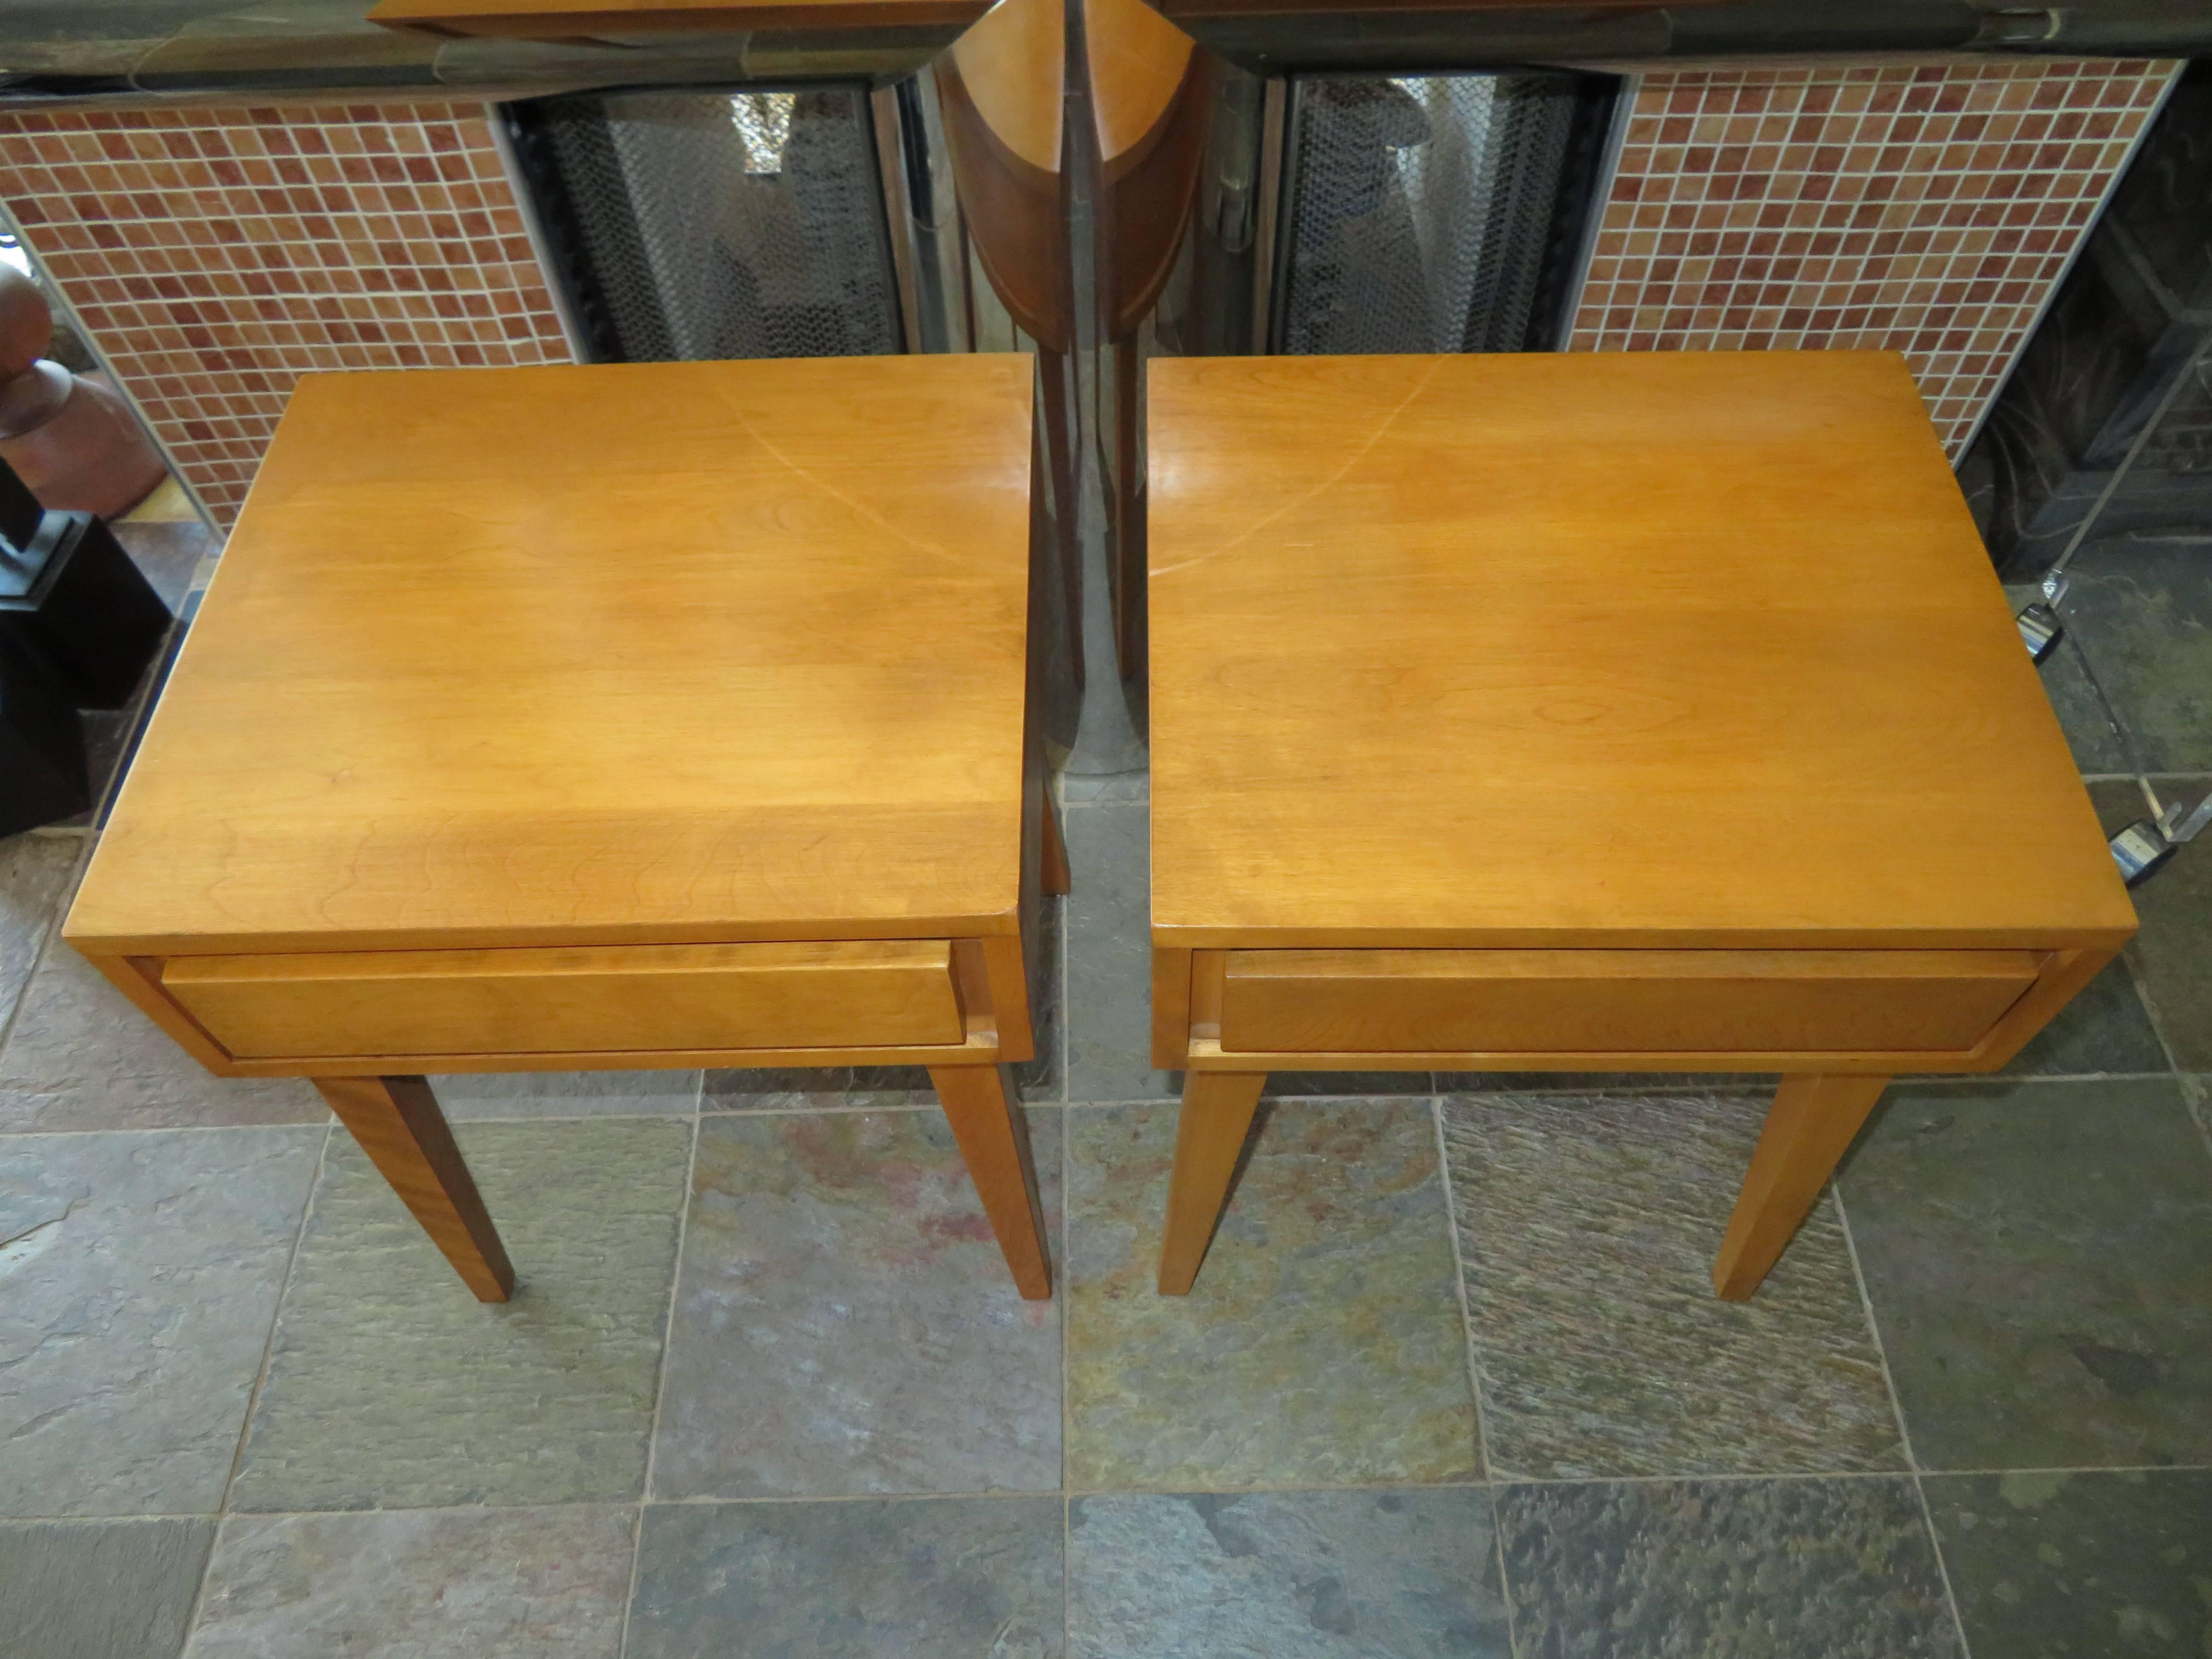 Lovely pair of Conant Ball maple nightstands or side tables. This petite pair is in very nice vintage condition with only light signs of age.